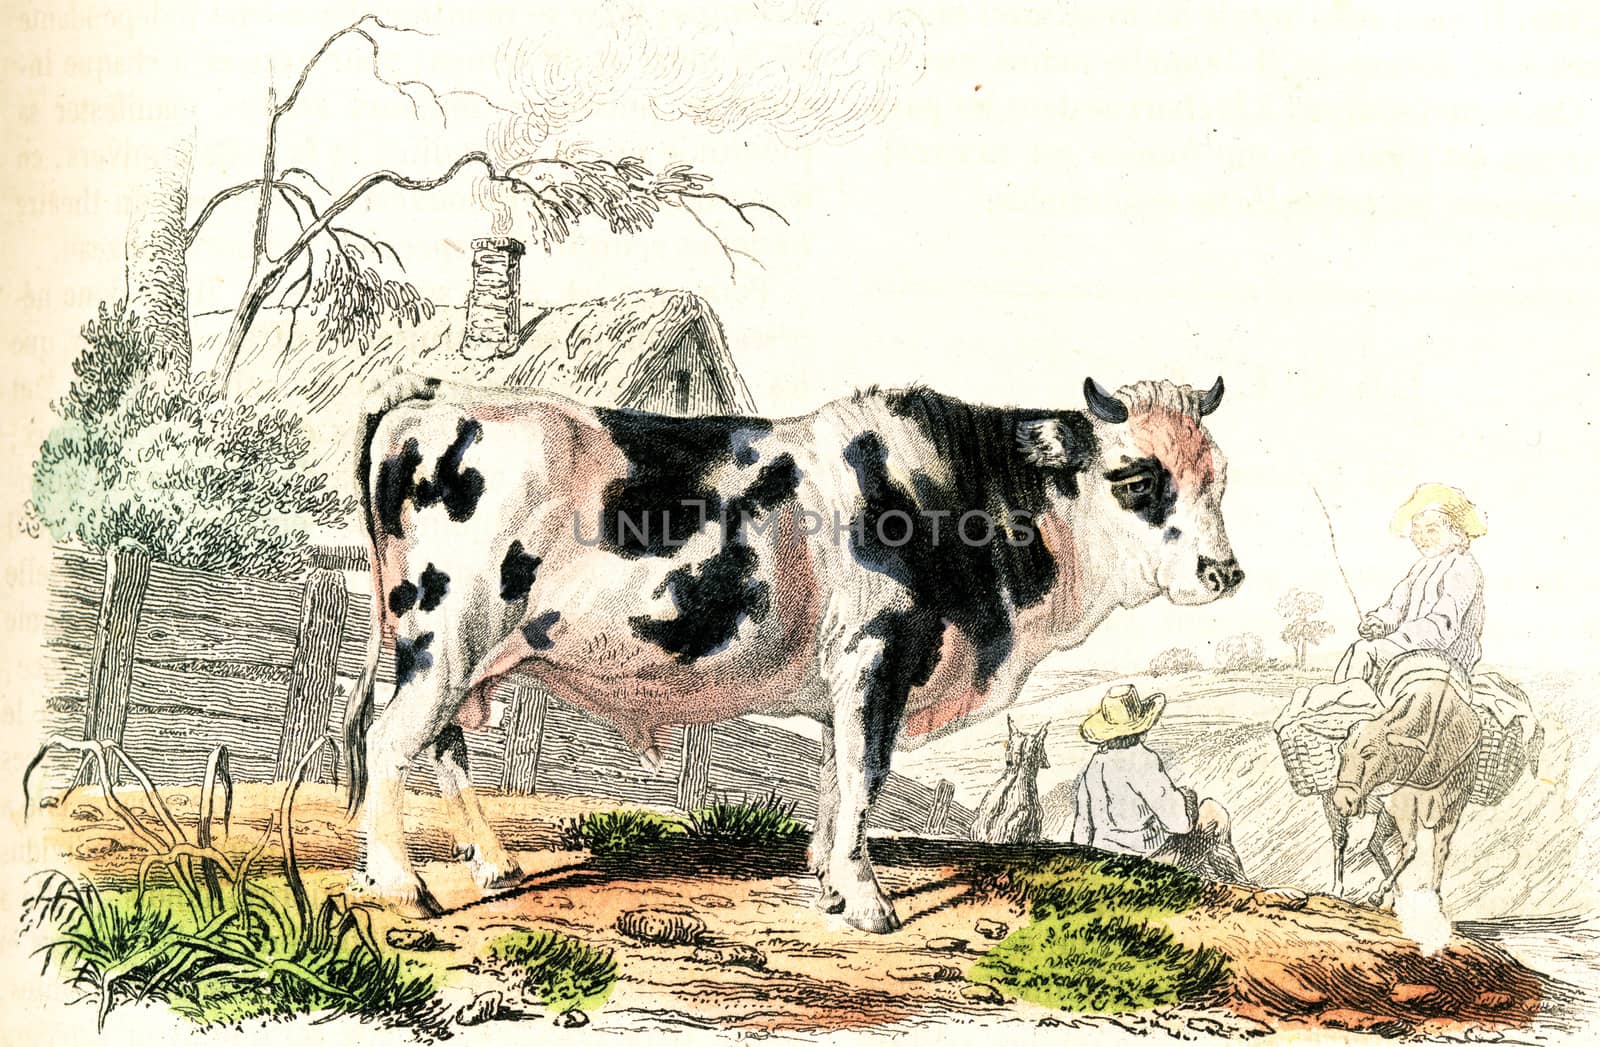 The bull, vintage engraved illustration. From Buffon Complete Work.
